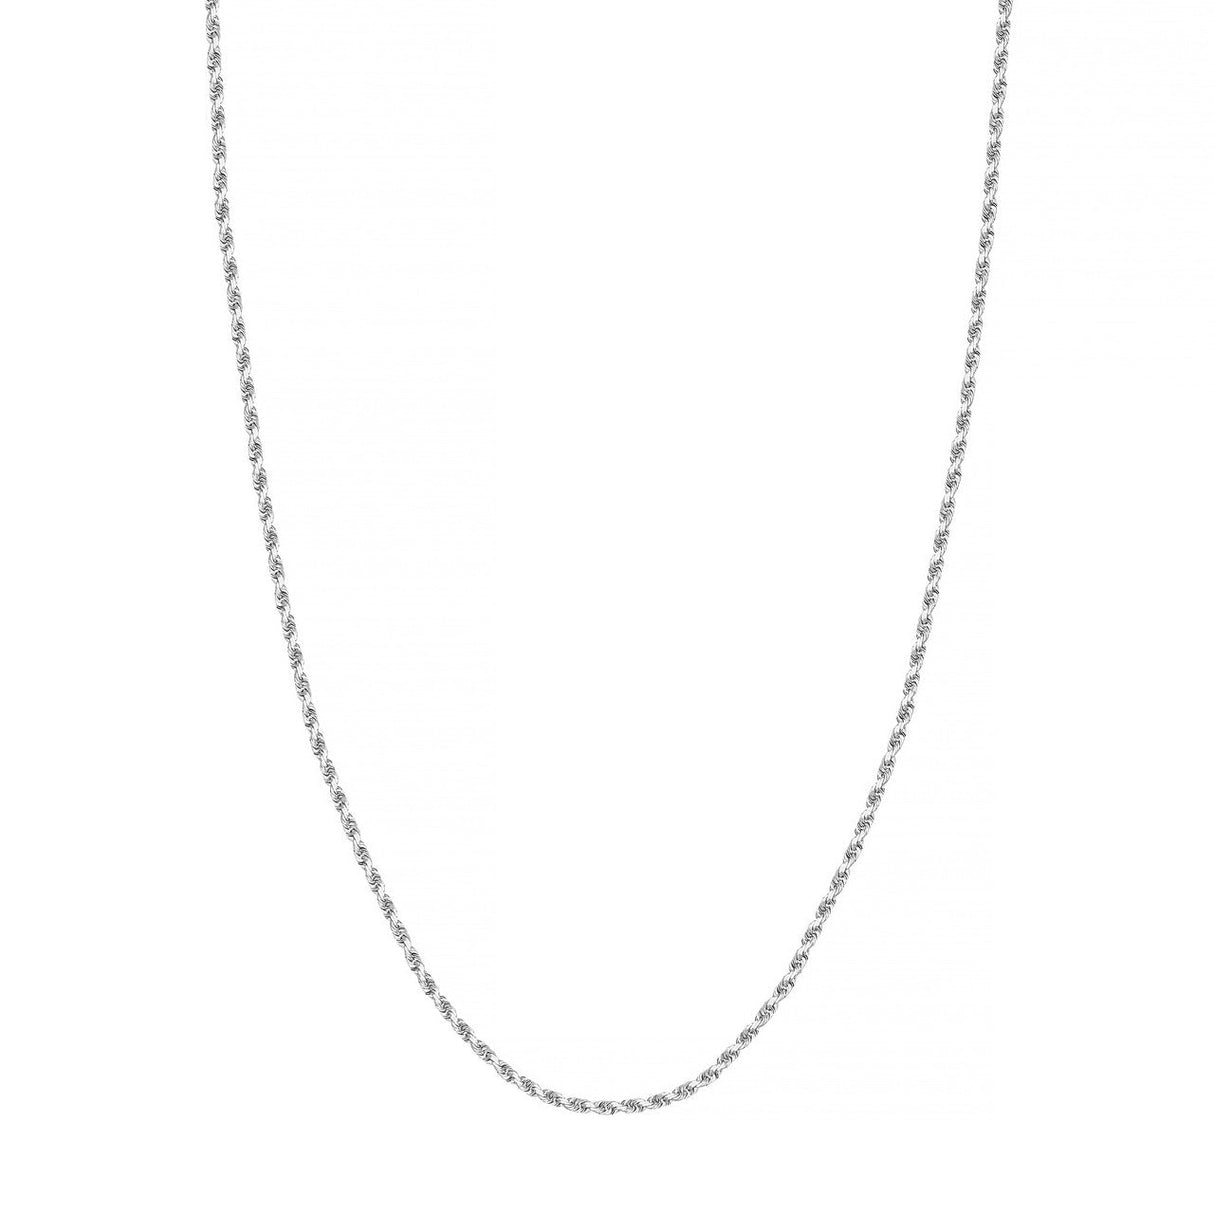 10K Gold Chain,16", 2.15mm D/C Rope Chain with Lobster Lock, Gold Chain Necklace, - Diamond Origin